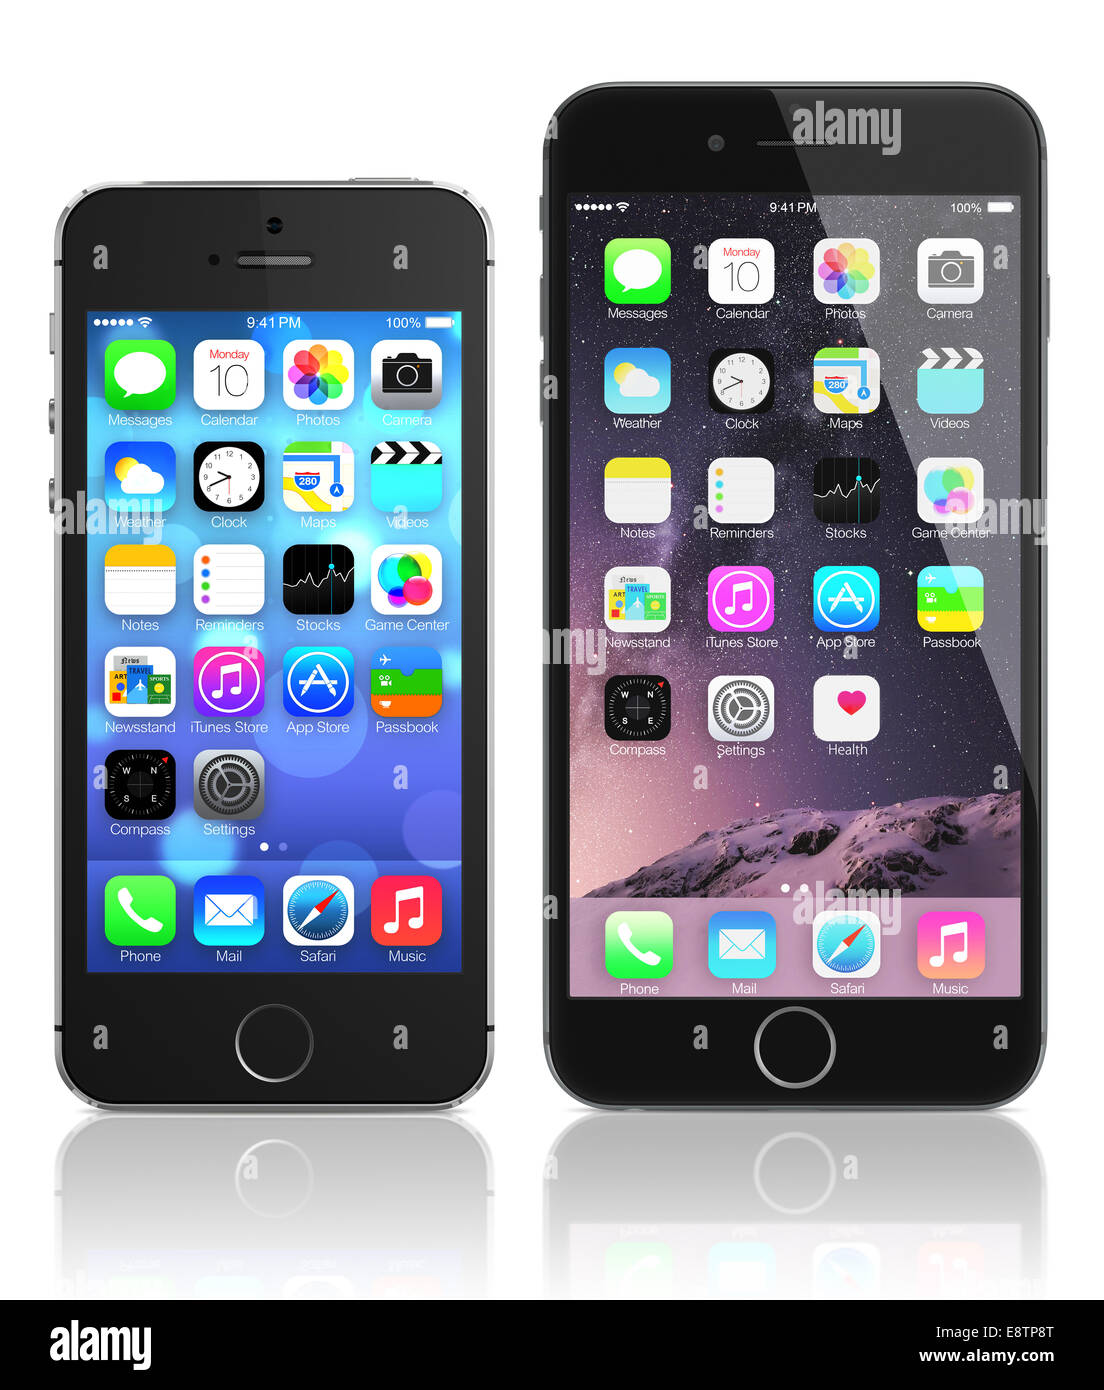 Apple Space Gray Iphone 6 And Iphone 5s Showing The Home Screen With Stock Photo Alamy